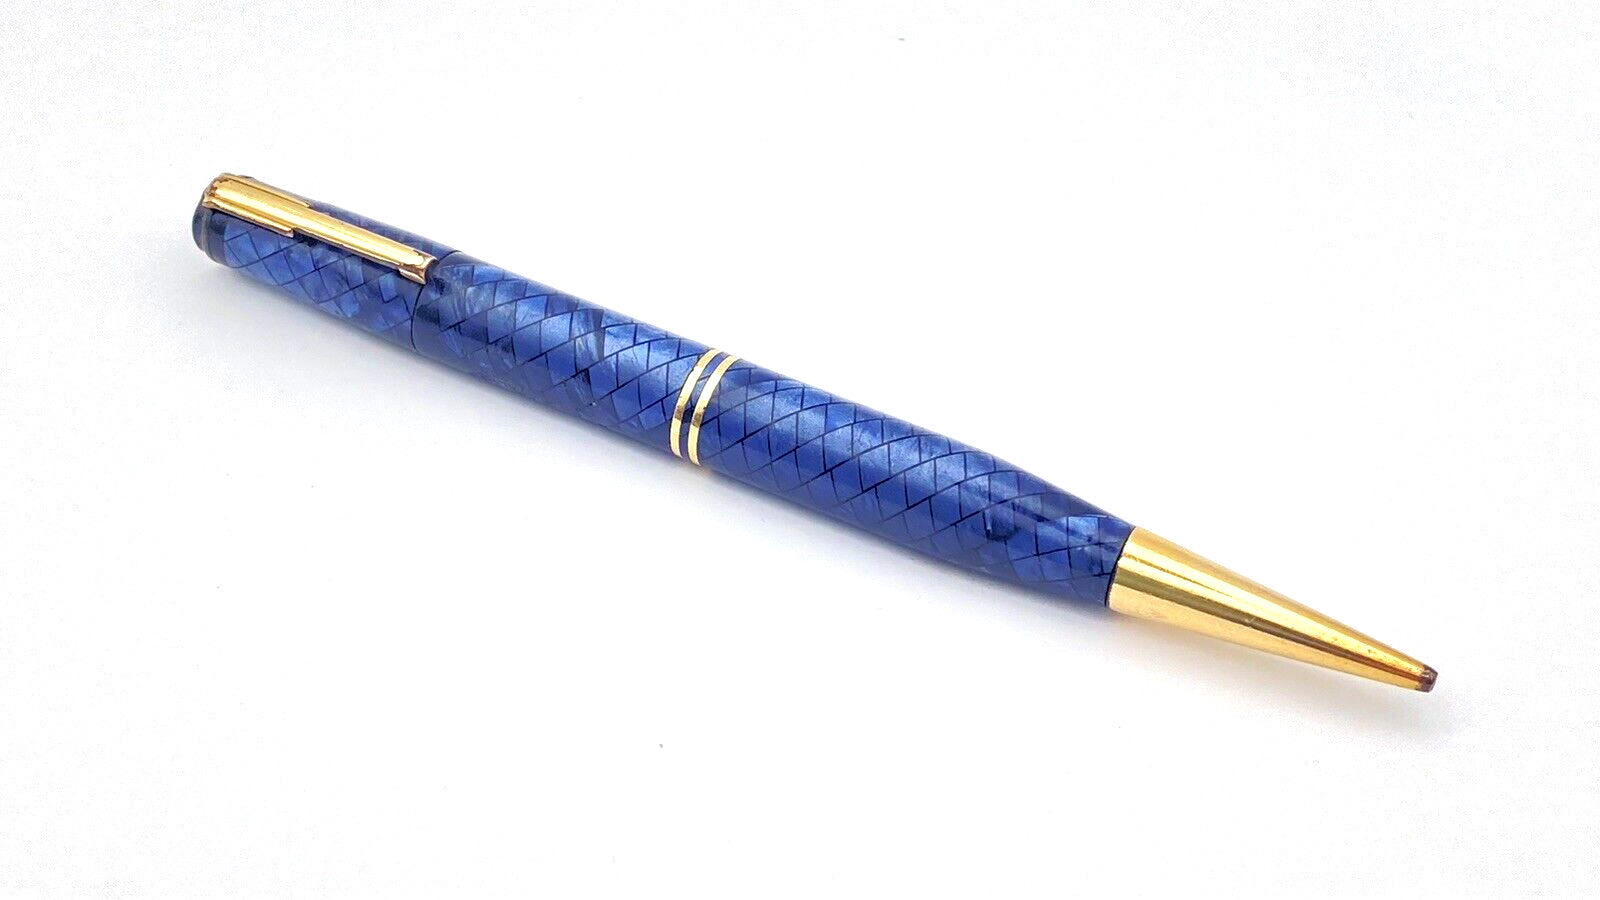 VINTAGE MABIE TODD FINE POYNT PENCIL IN BLUE SNAKE SKIN MADE IN ENGLAND 1930`S